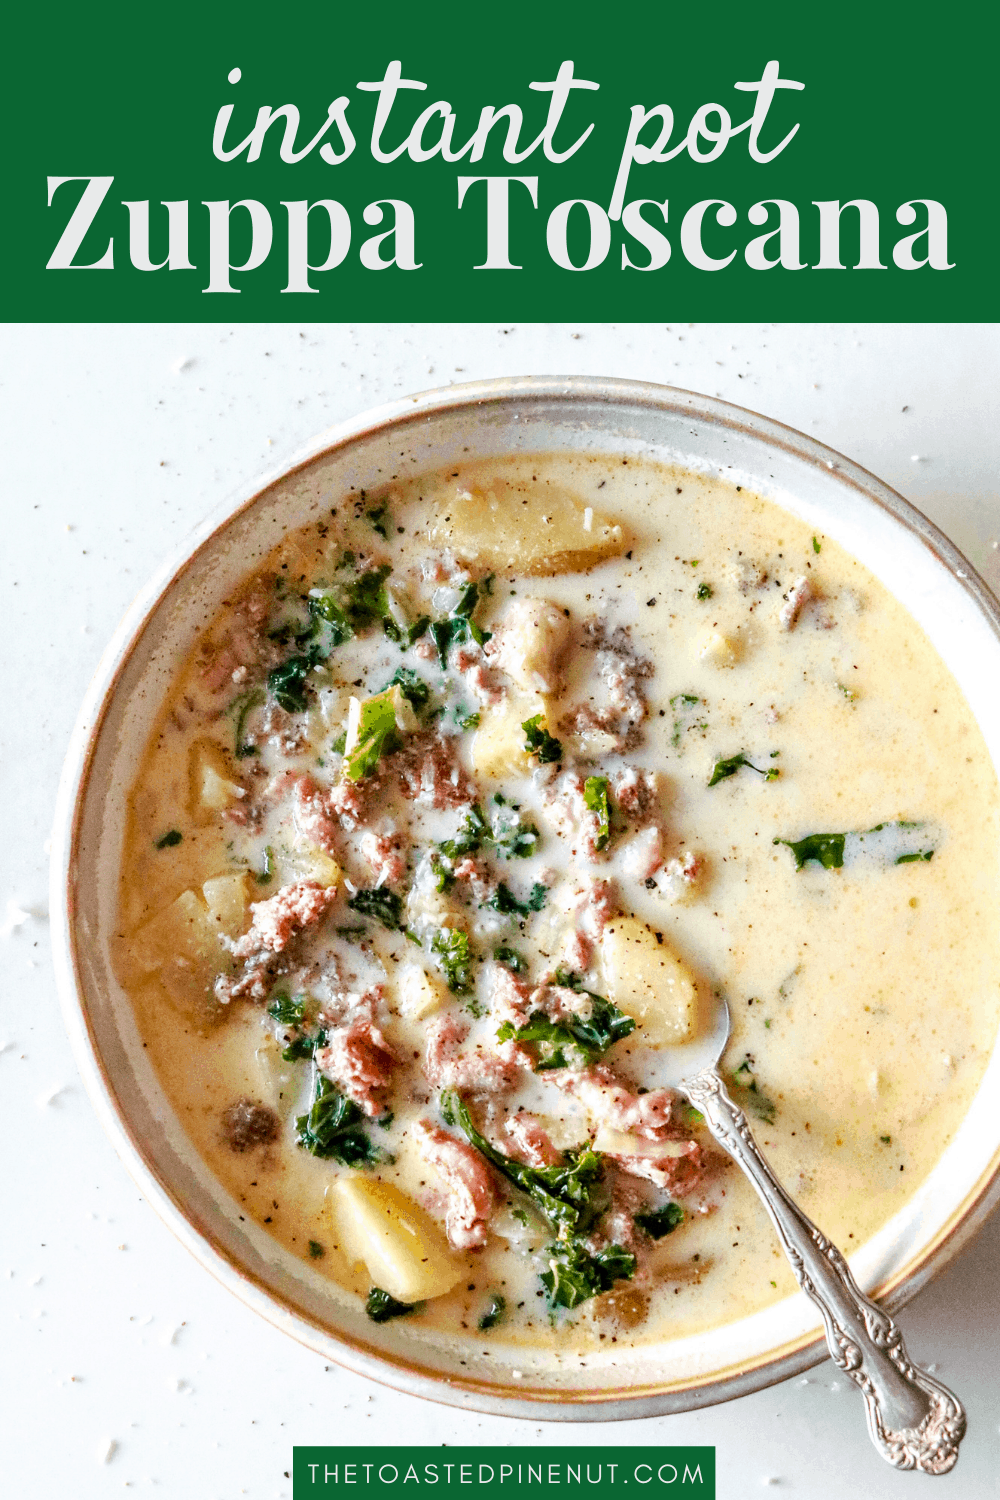 Quick 30-Minute Instant Pot Zuppa Toscana Soup | The Toasted Pine Nut